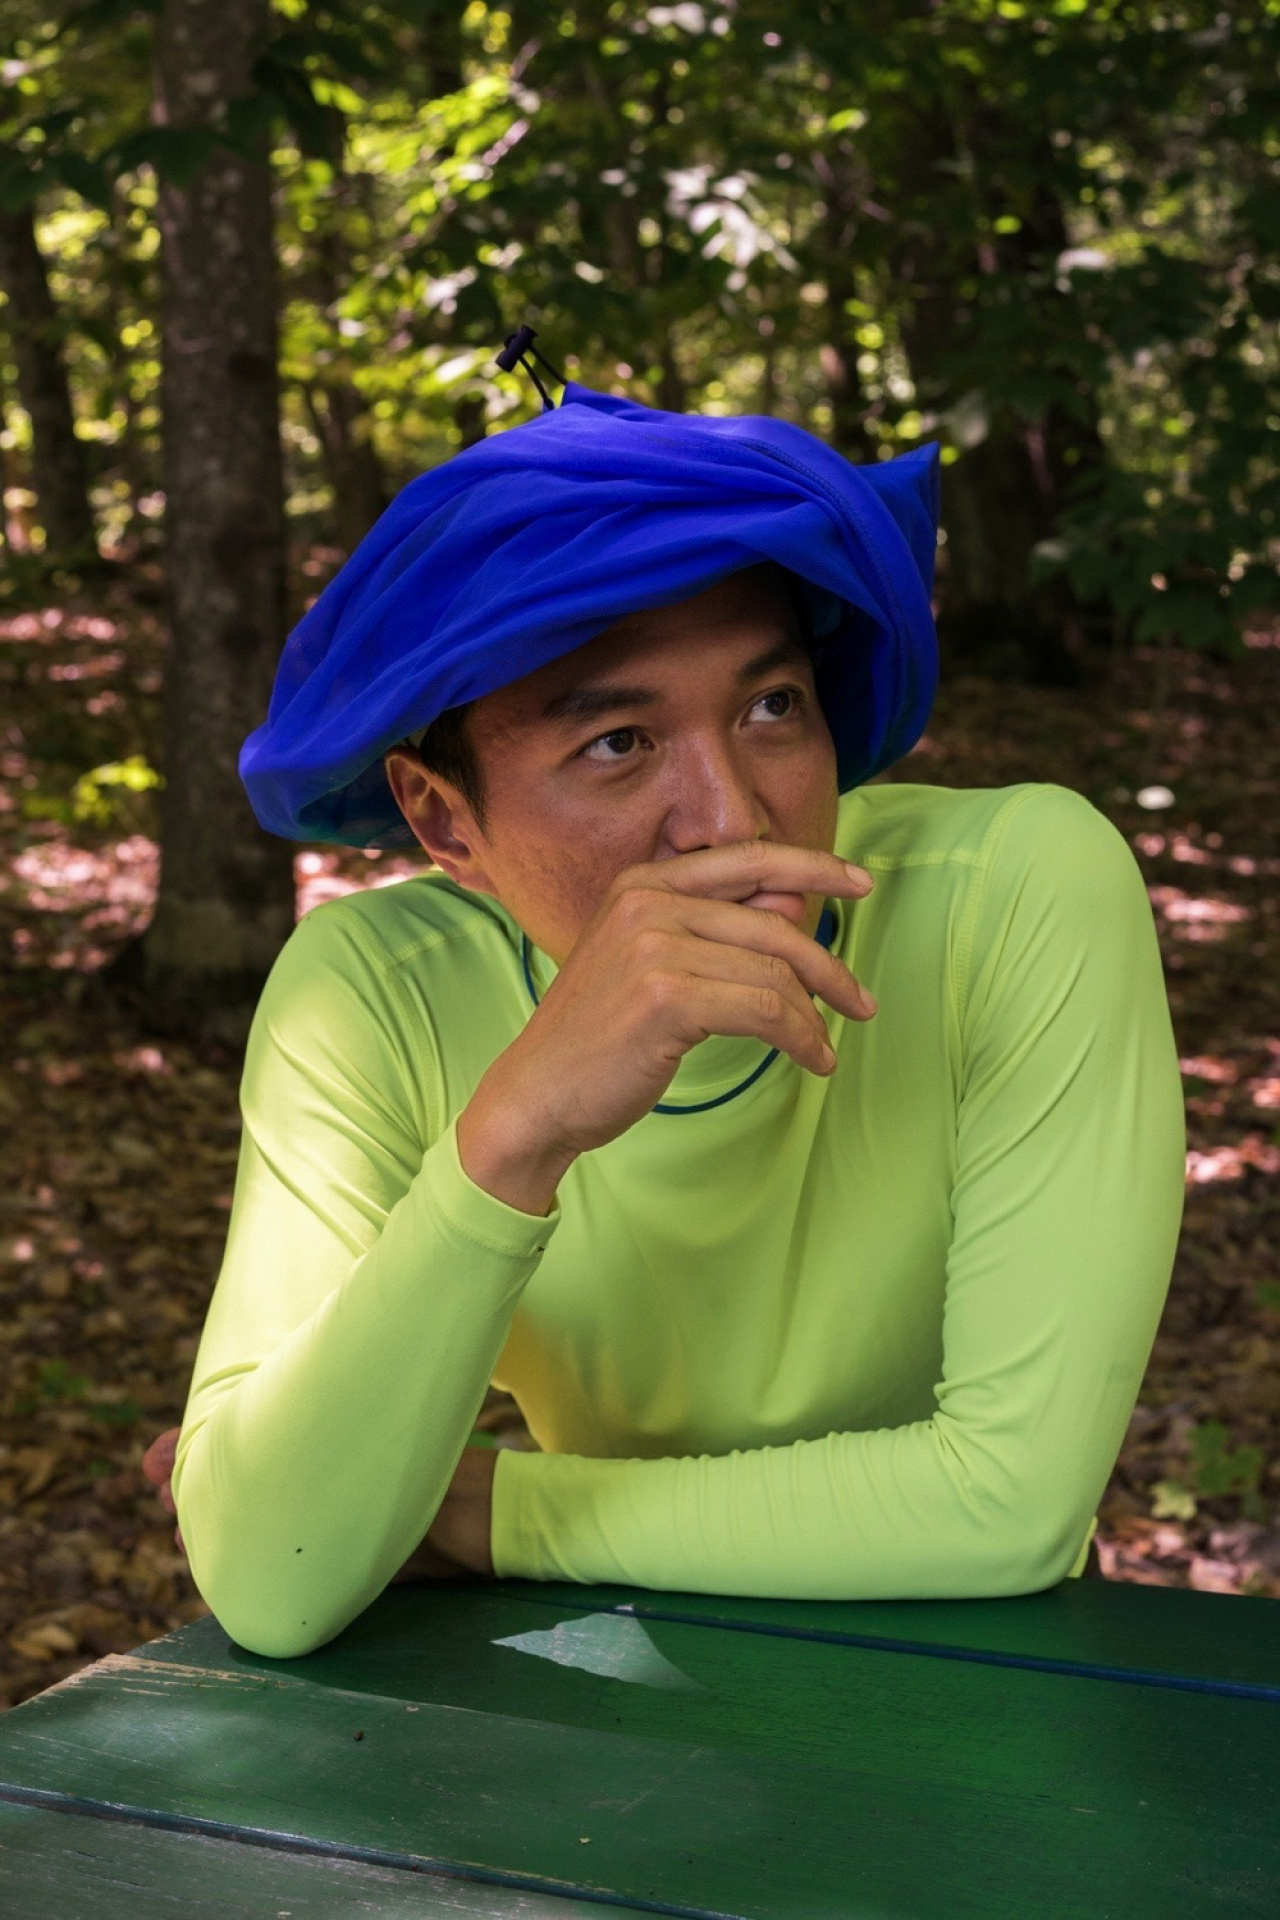 A man in a long green shirt and a blue turban can be seen resting his head on one hand and looking out of the picture on the right.